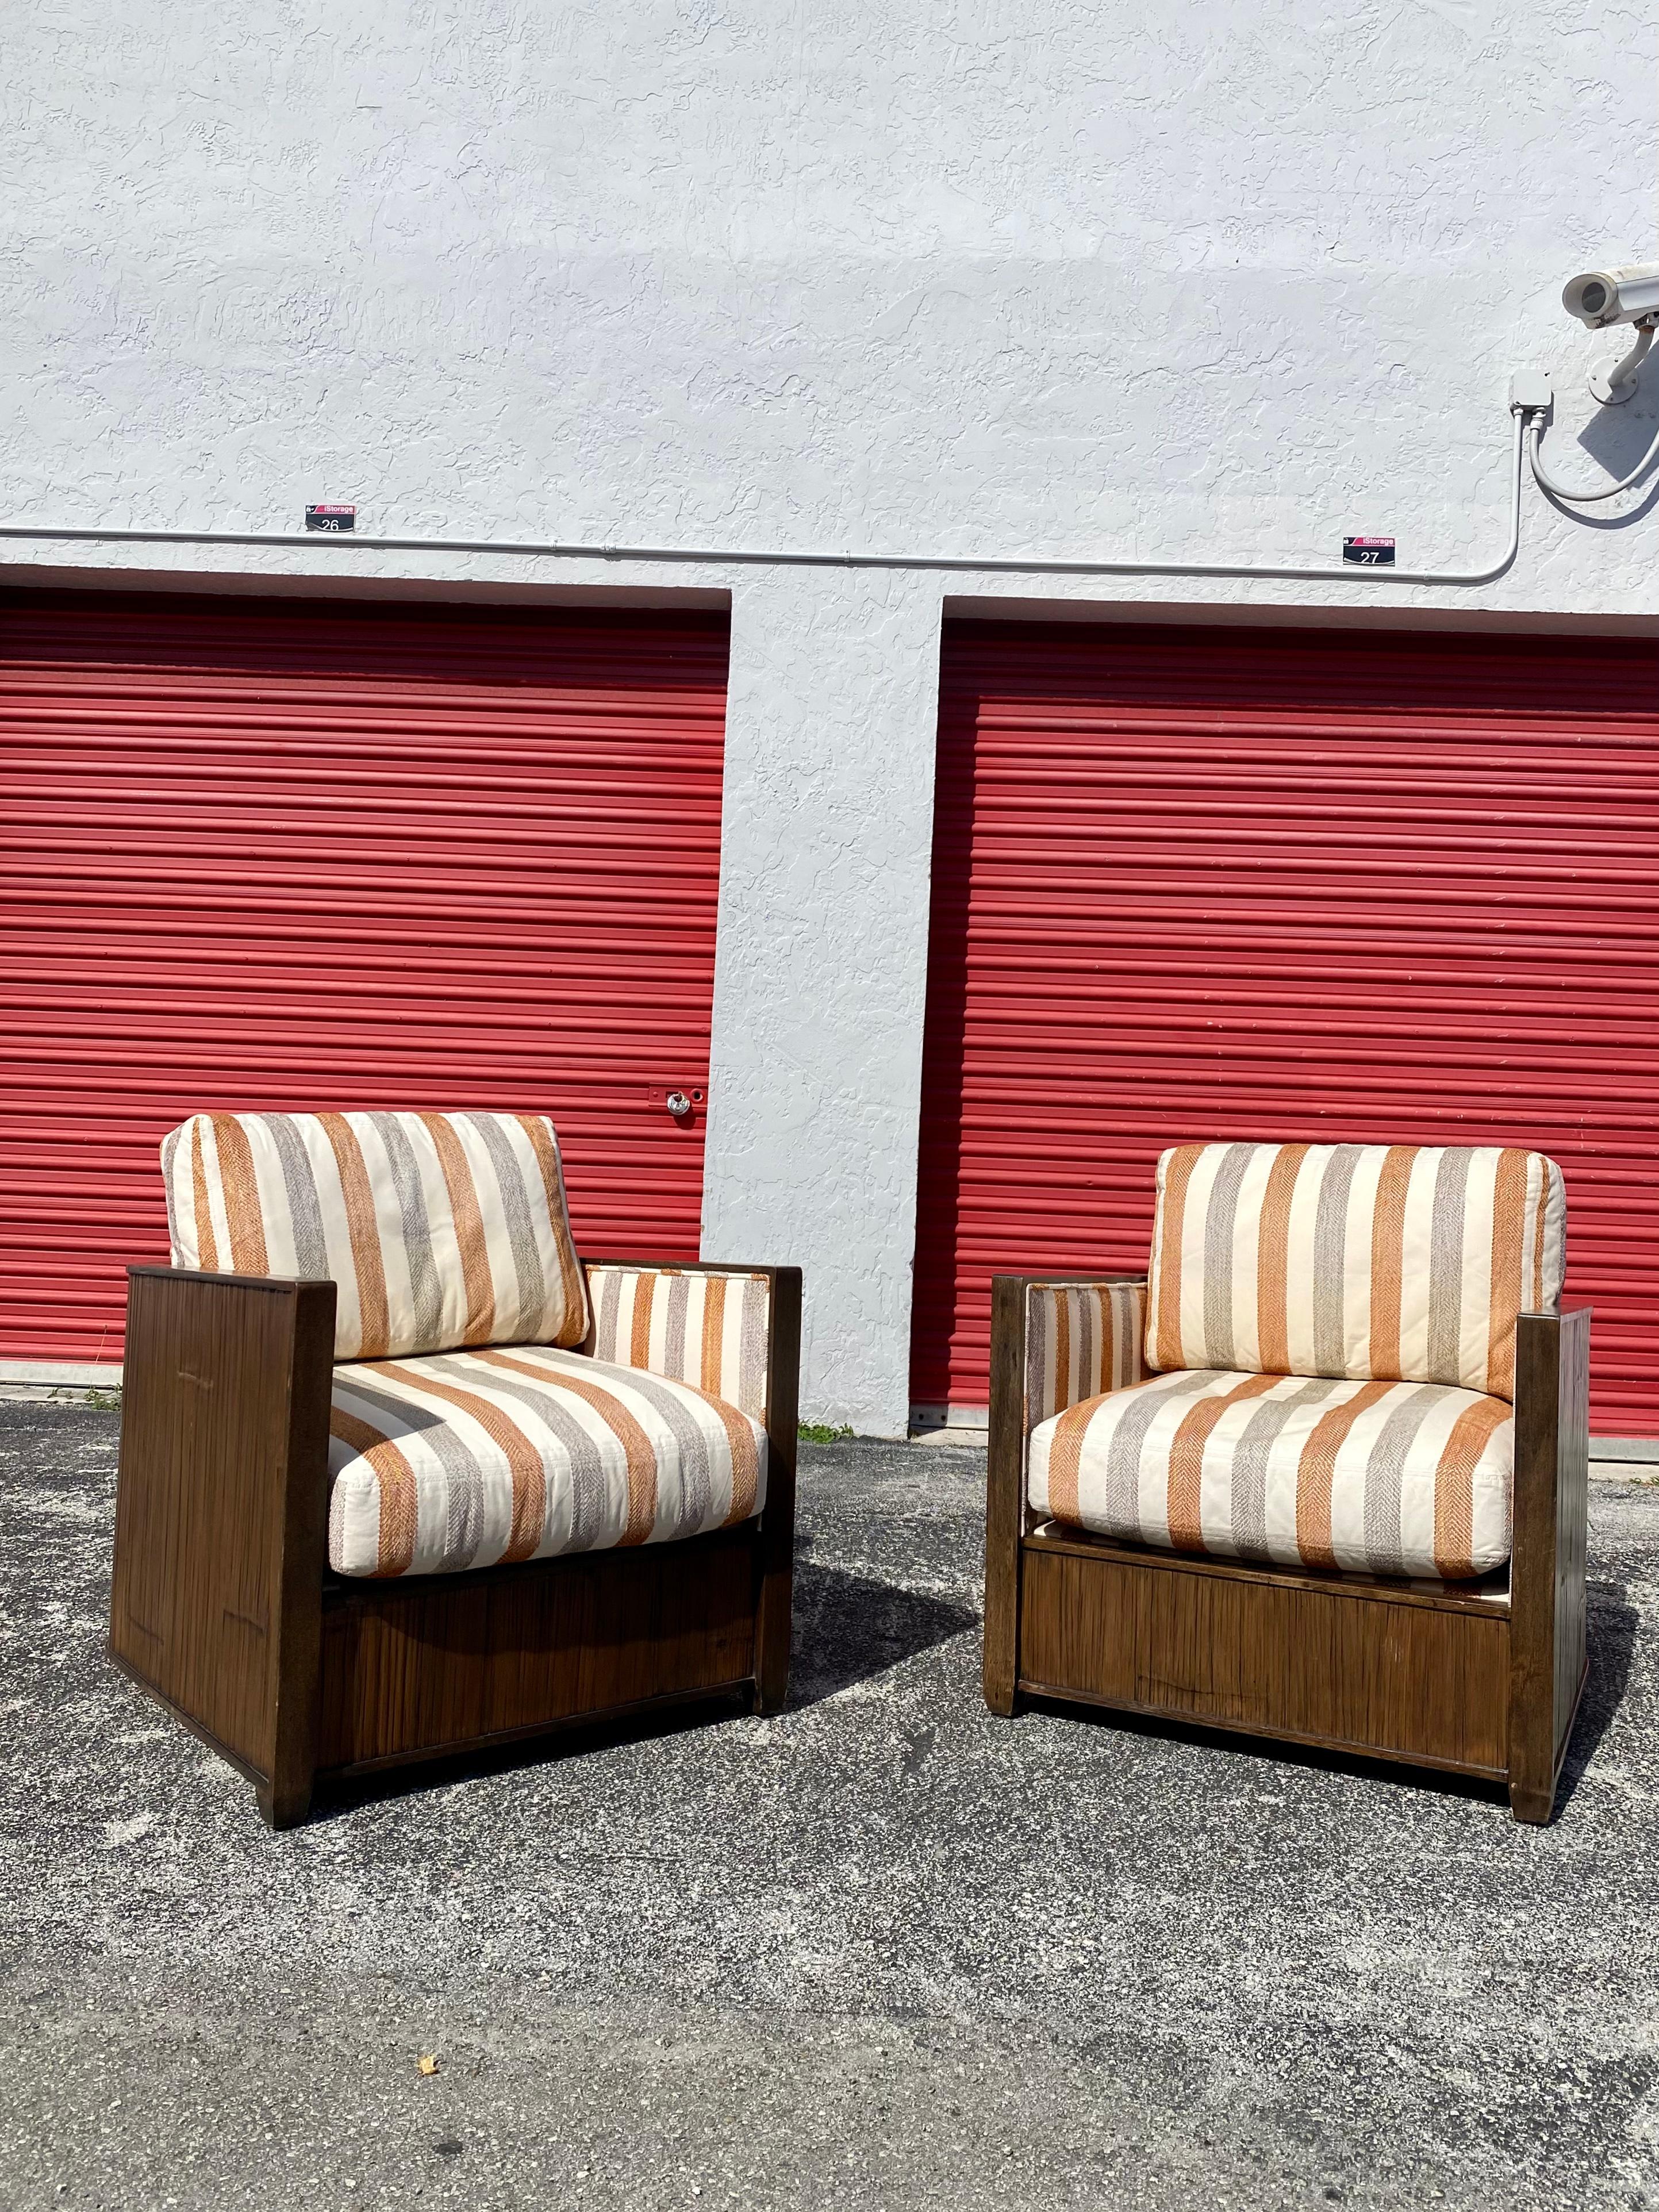 Extremely rare! Dramatic pair of organic wood case barrel back club chairs by McGuire. The chairs feature a slight barrel form rattan and wood frame. Fully upholstered with thick filled cushions for ultimate comfort. Textured wood case designed.